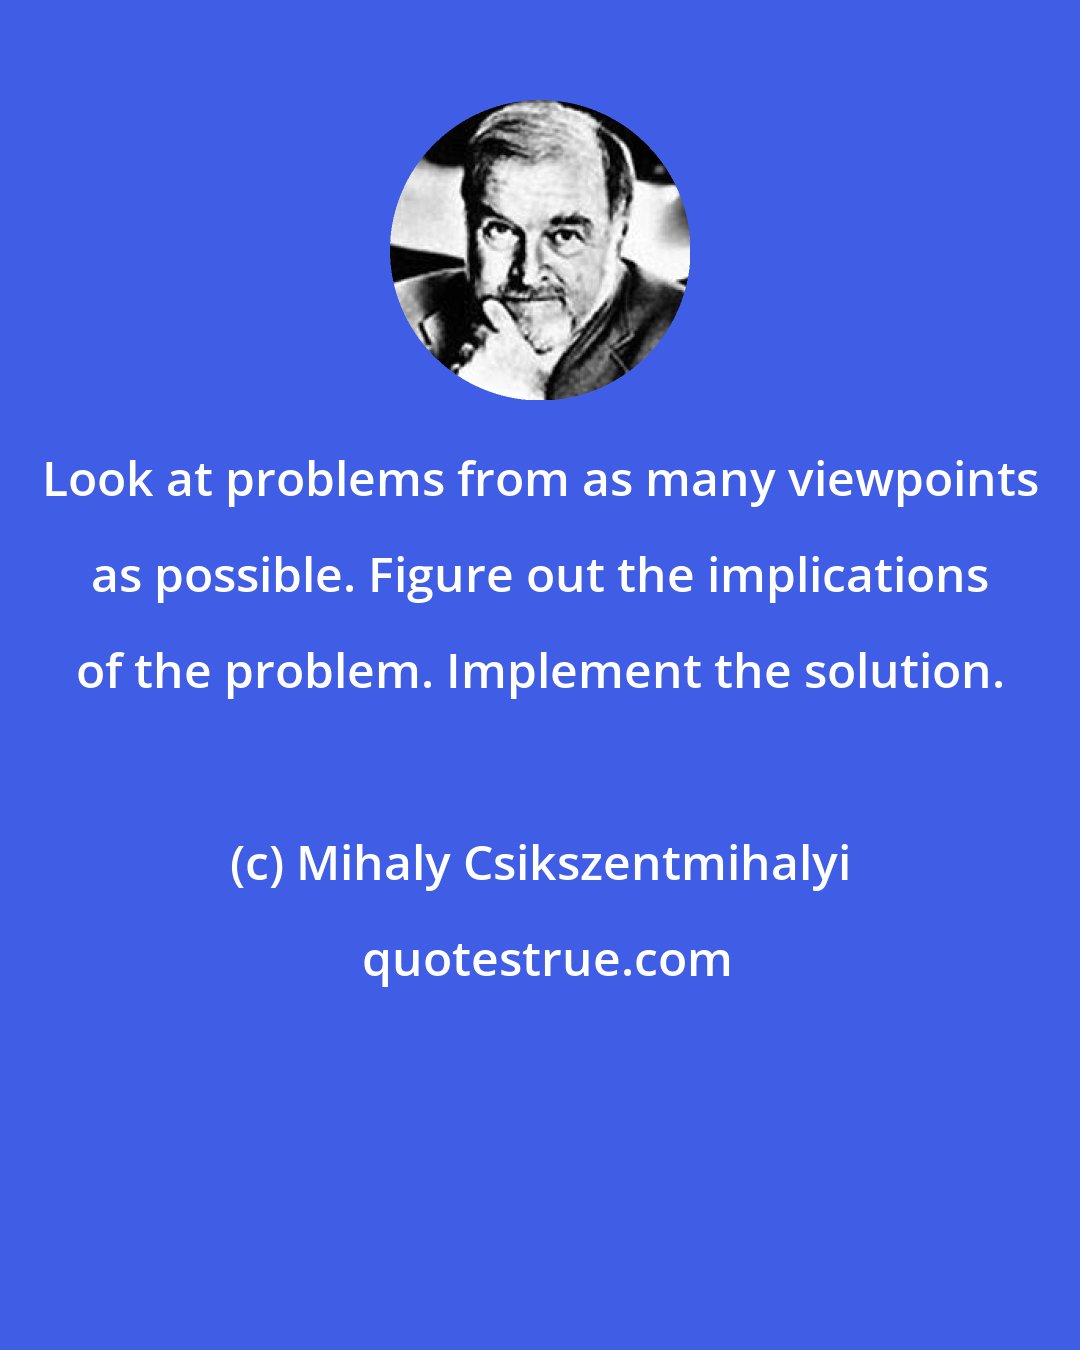 Mihaly Csikszentmihalyi: Look at problems from as many viewpoints as possible. Figure out the implications of the problem. Implement the solution.